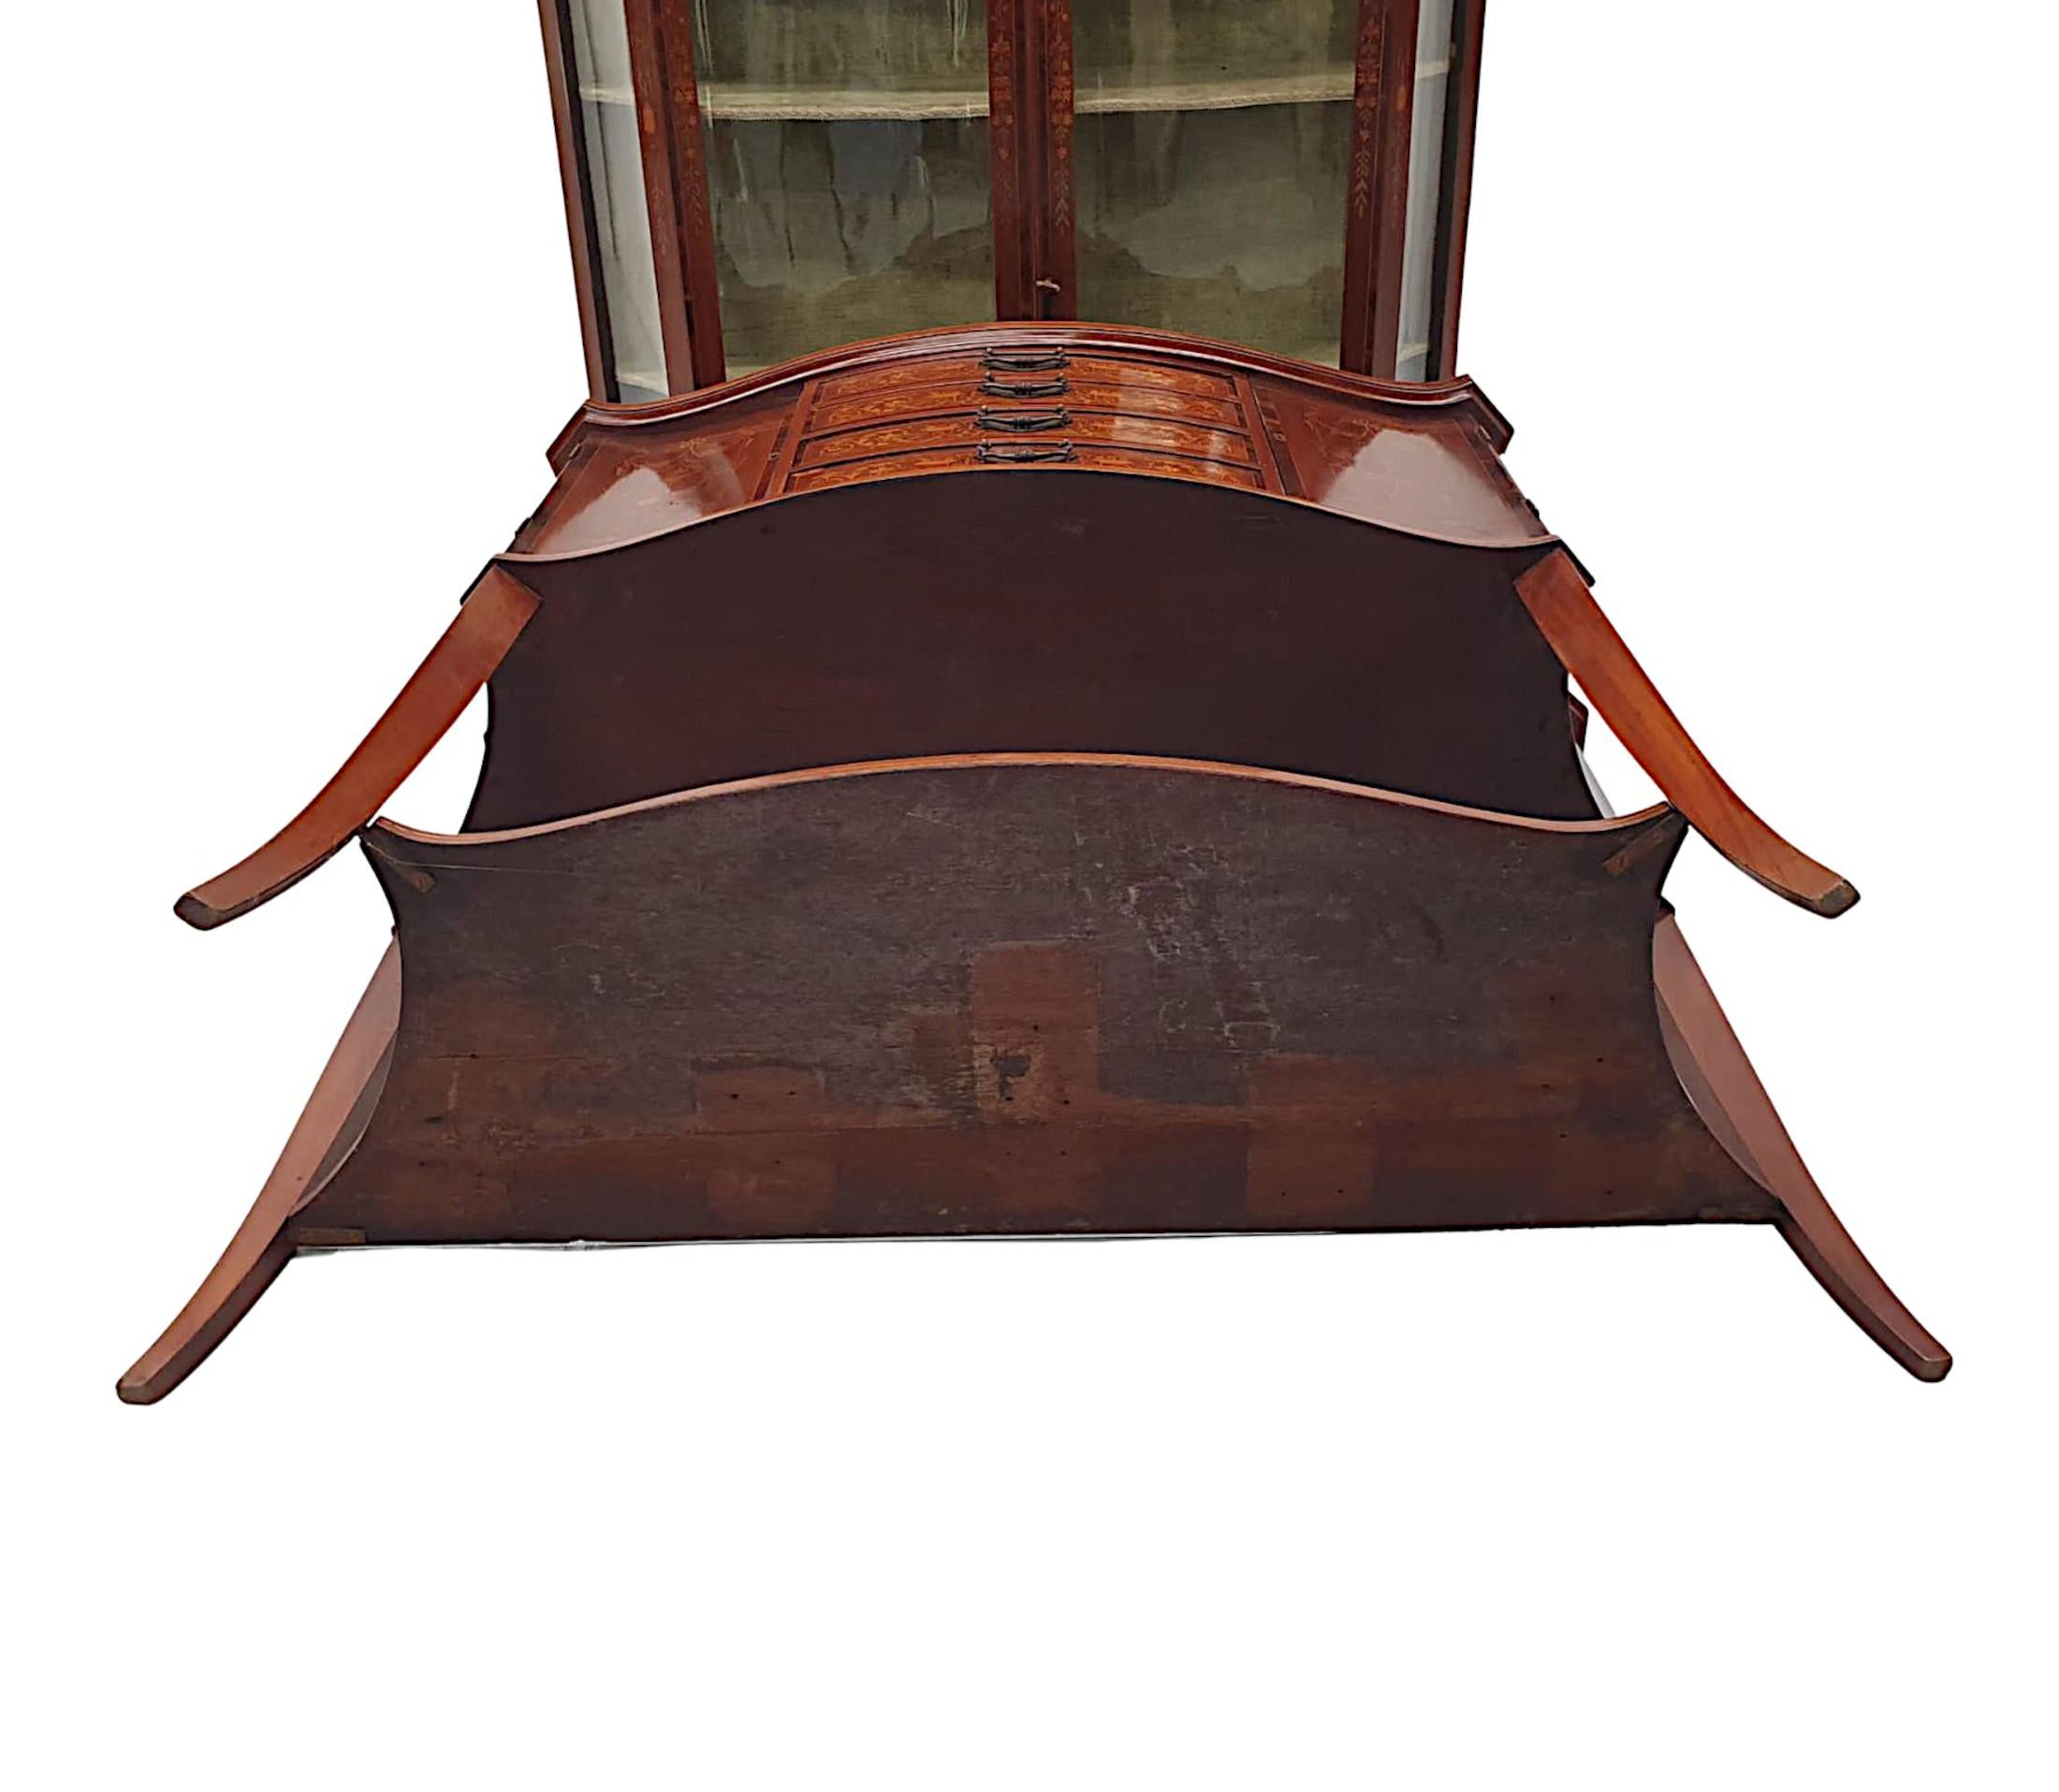 Exceptional Edwardian Display Case Attributed to Edward and Roberts im Angebot 6